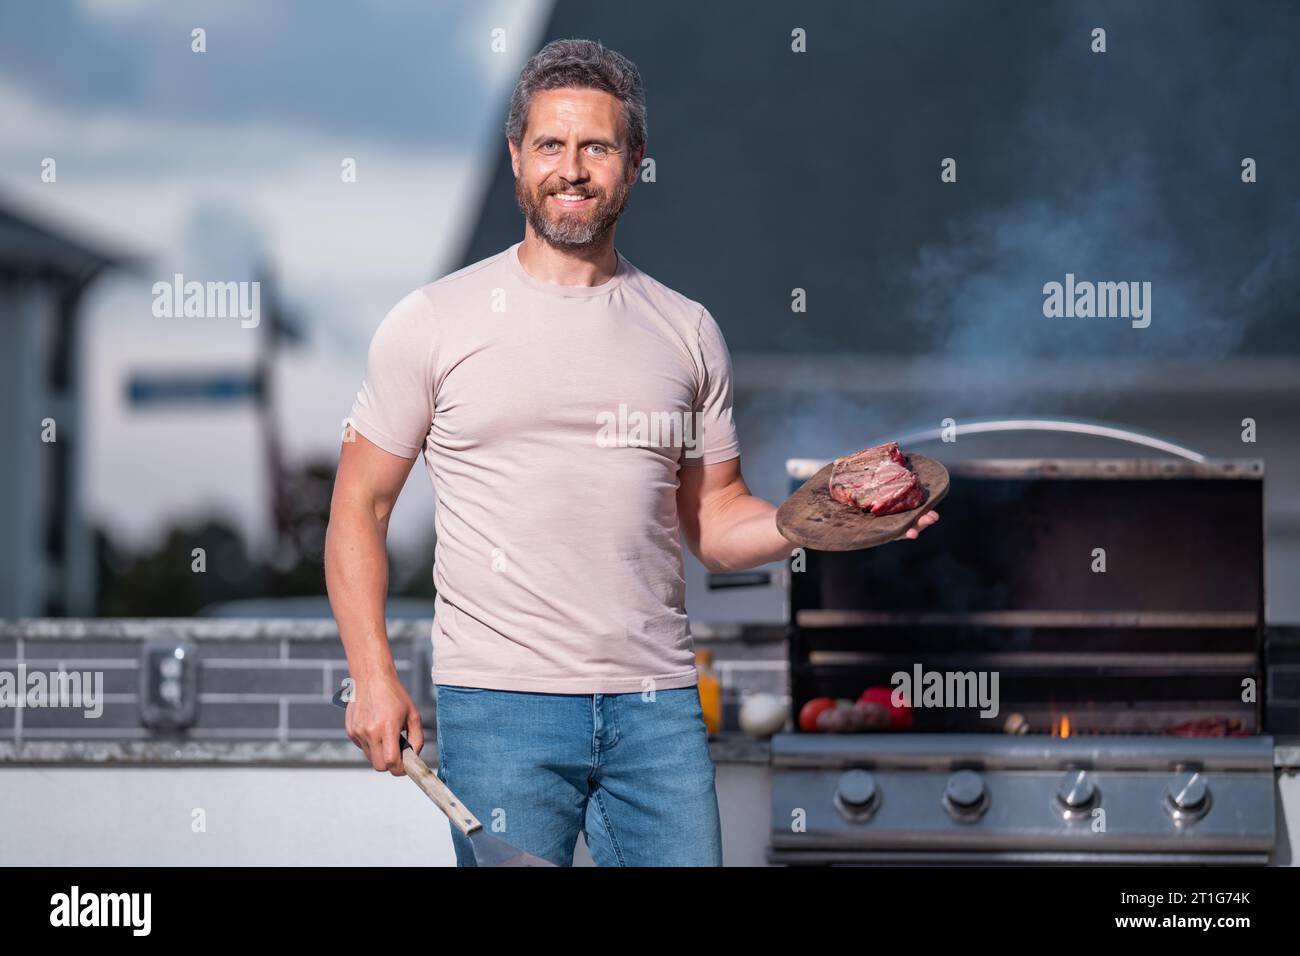 Grill cook. Chef with BBQ cooking tools. Barbecue and grill. Picnic and barbecue party. Chief cook with utensils for barbecue grill. Barbeque on holid Stock Photo